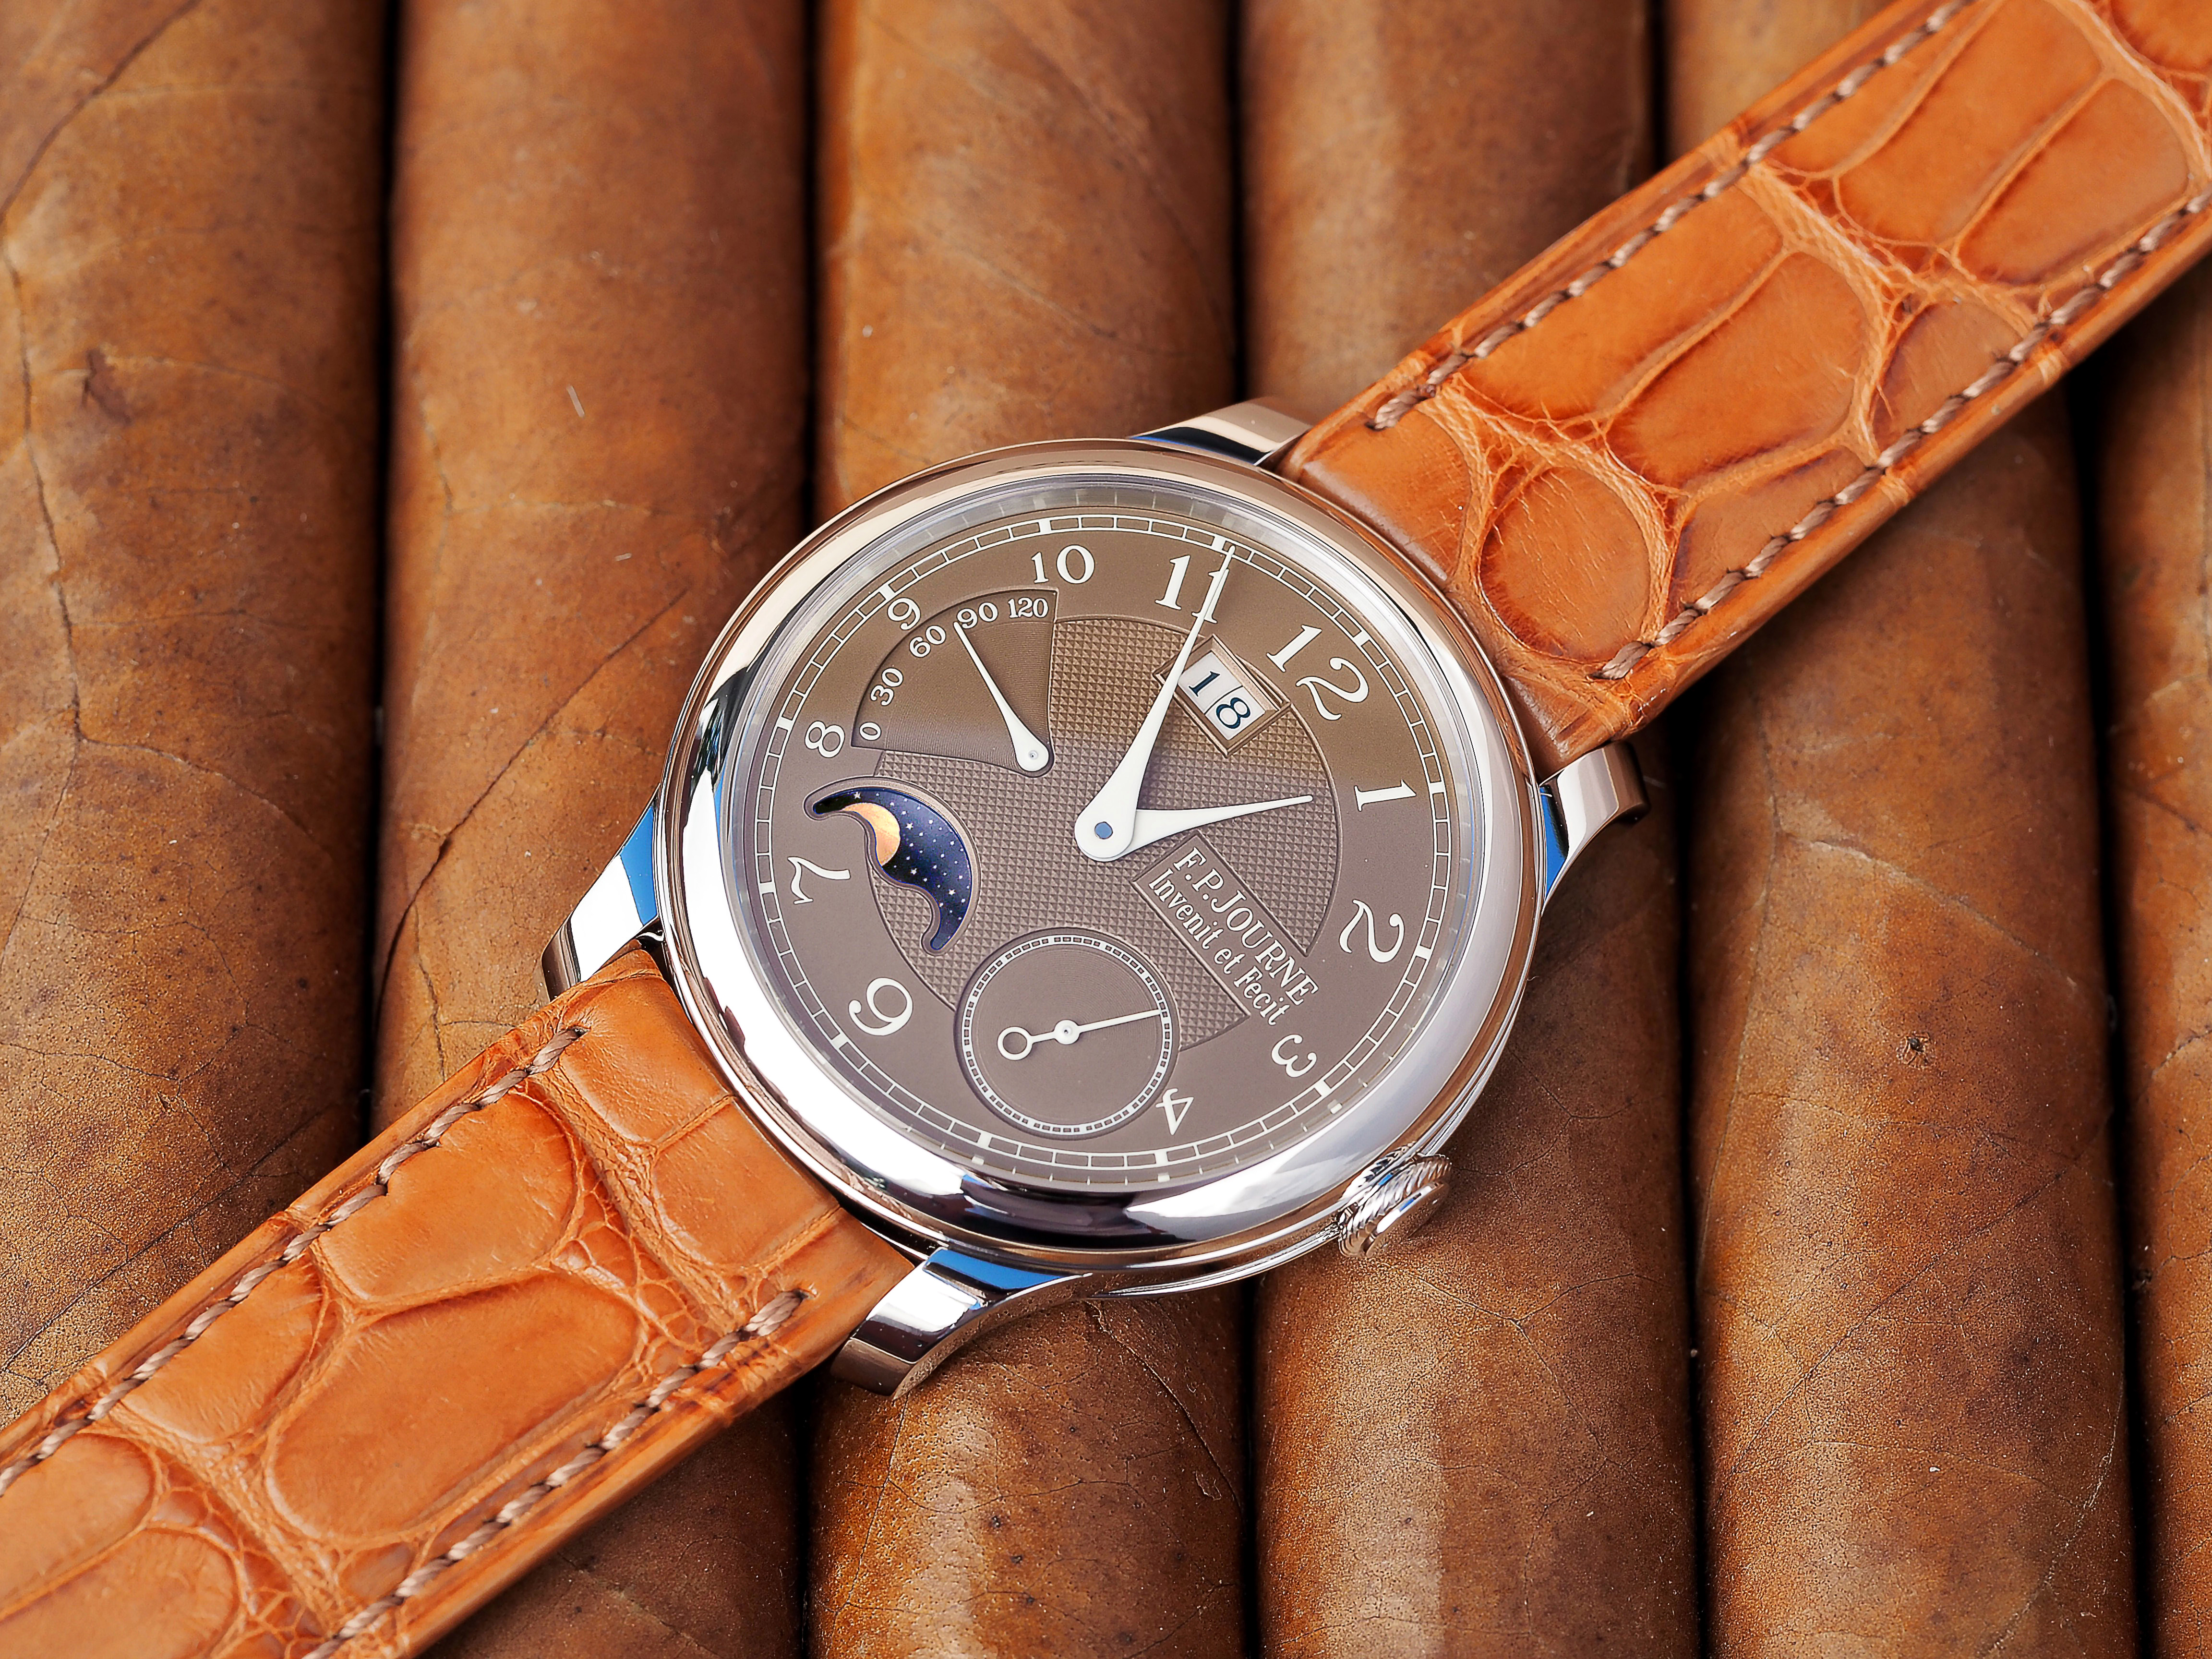 F.P. Journe’s Moonphase: Gaining a New Appreciation